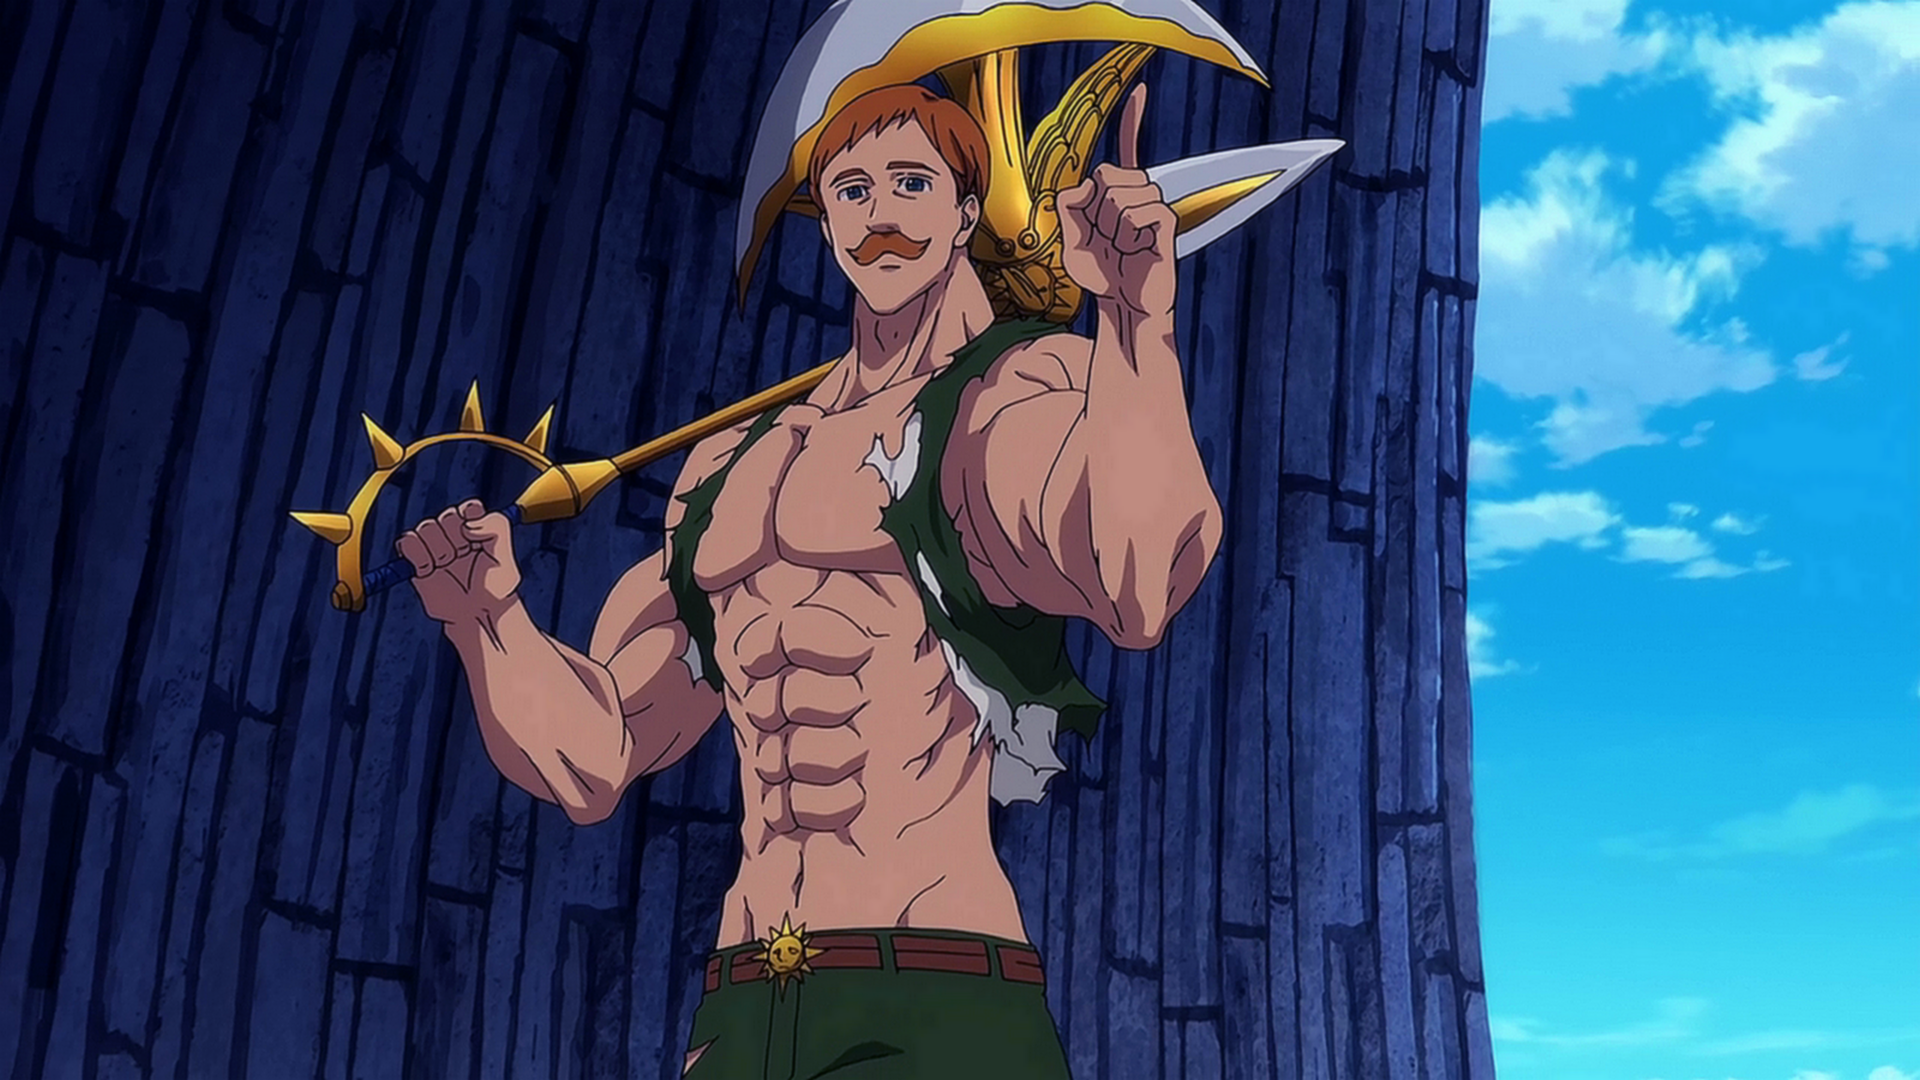 Lord Escanor  HD Wallpaper  Background Image 1920x1080  